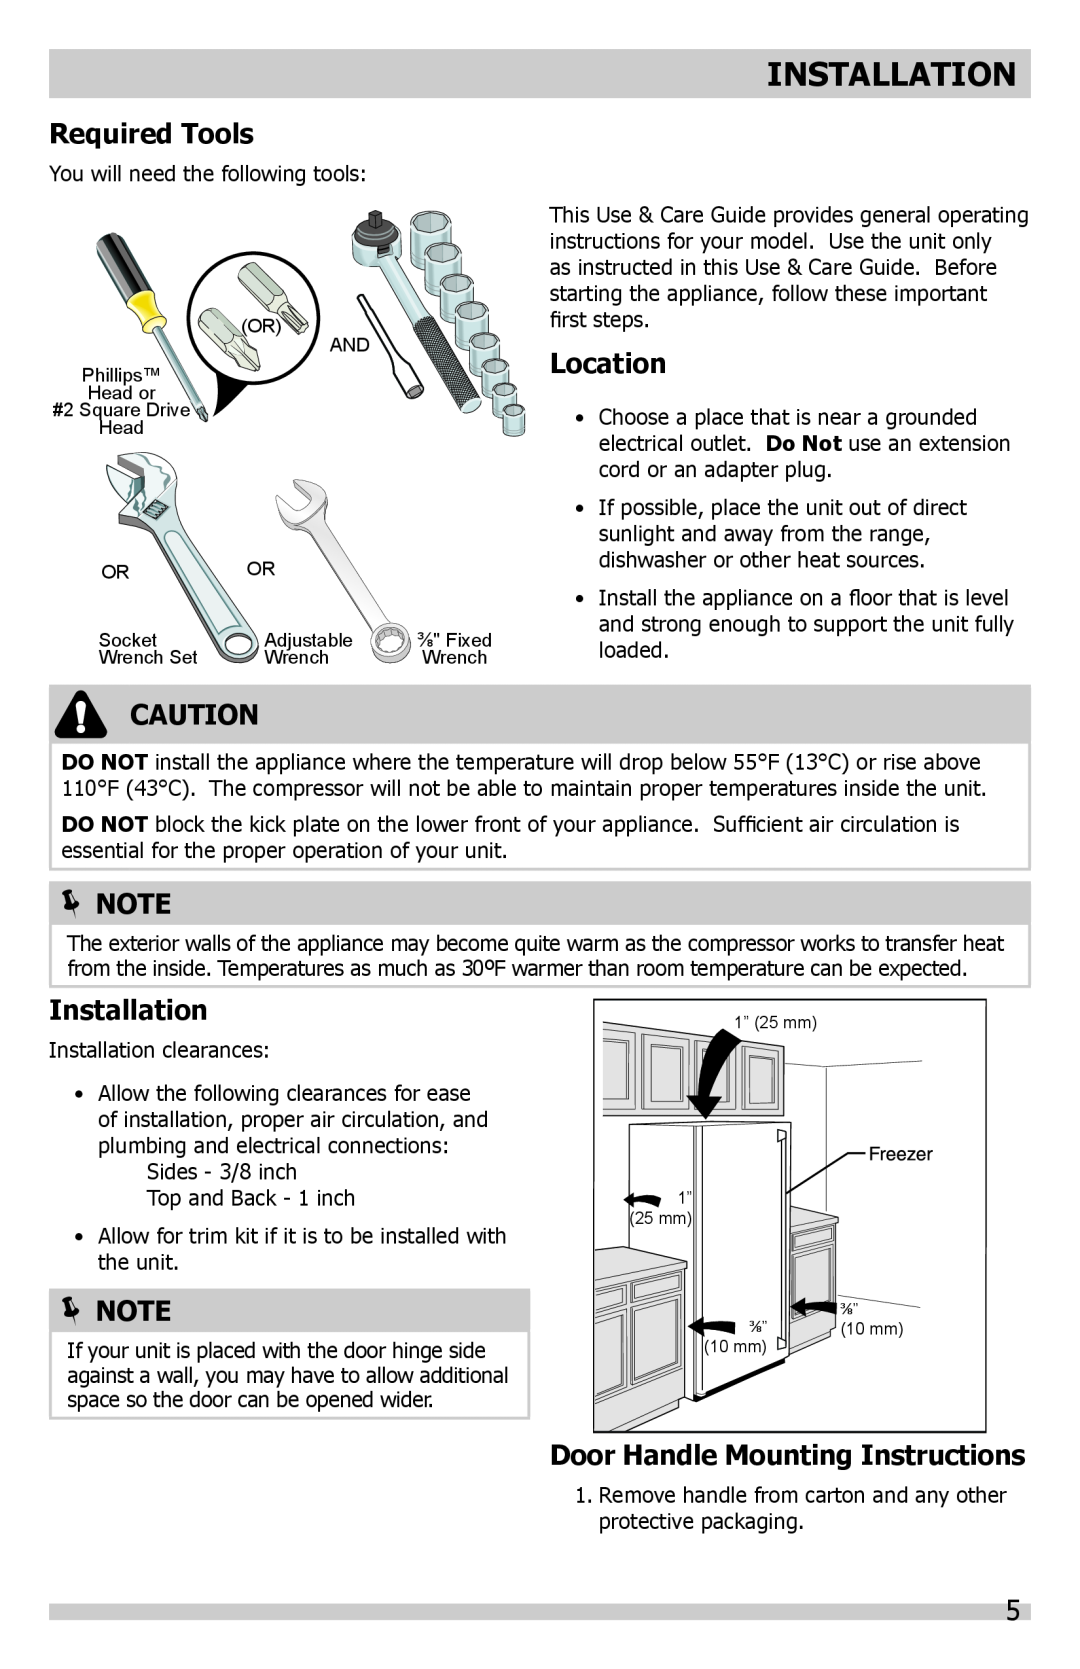 Frigidaire A01060901 manual Installation, Required Tools, Location, Door Handle Mounting Instructions,  Note 